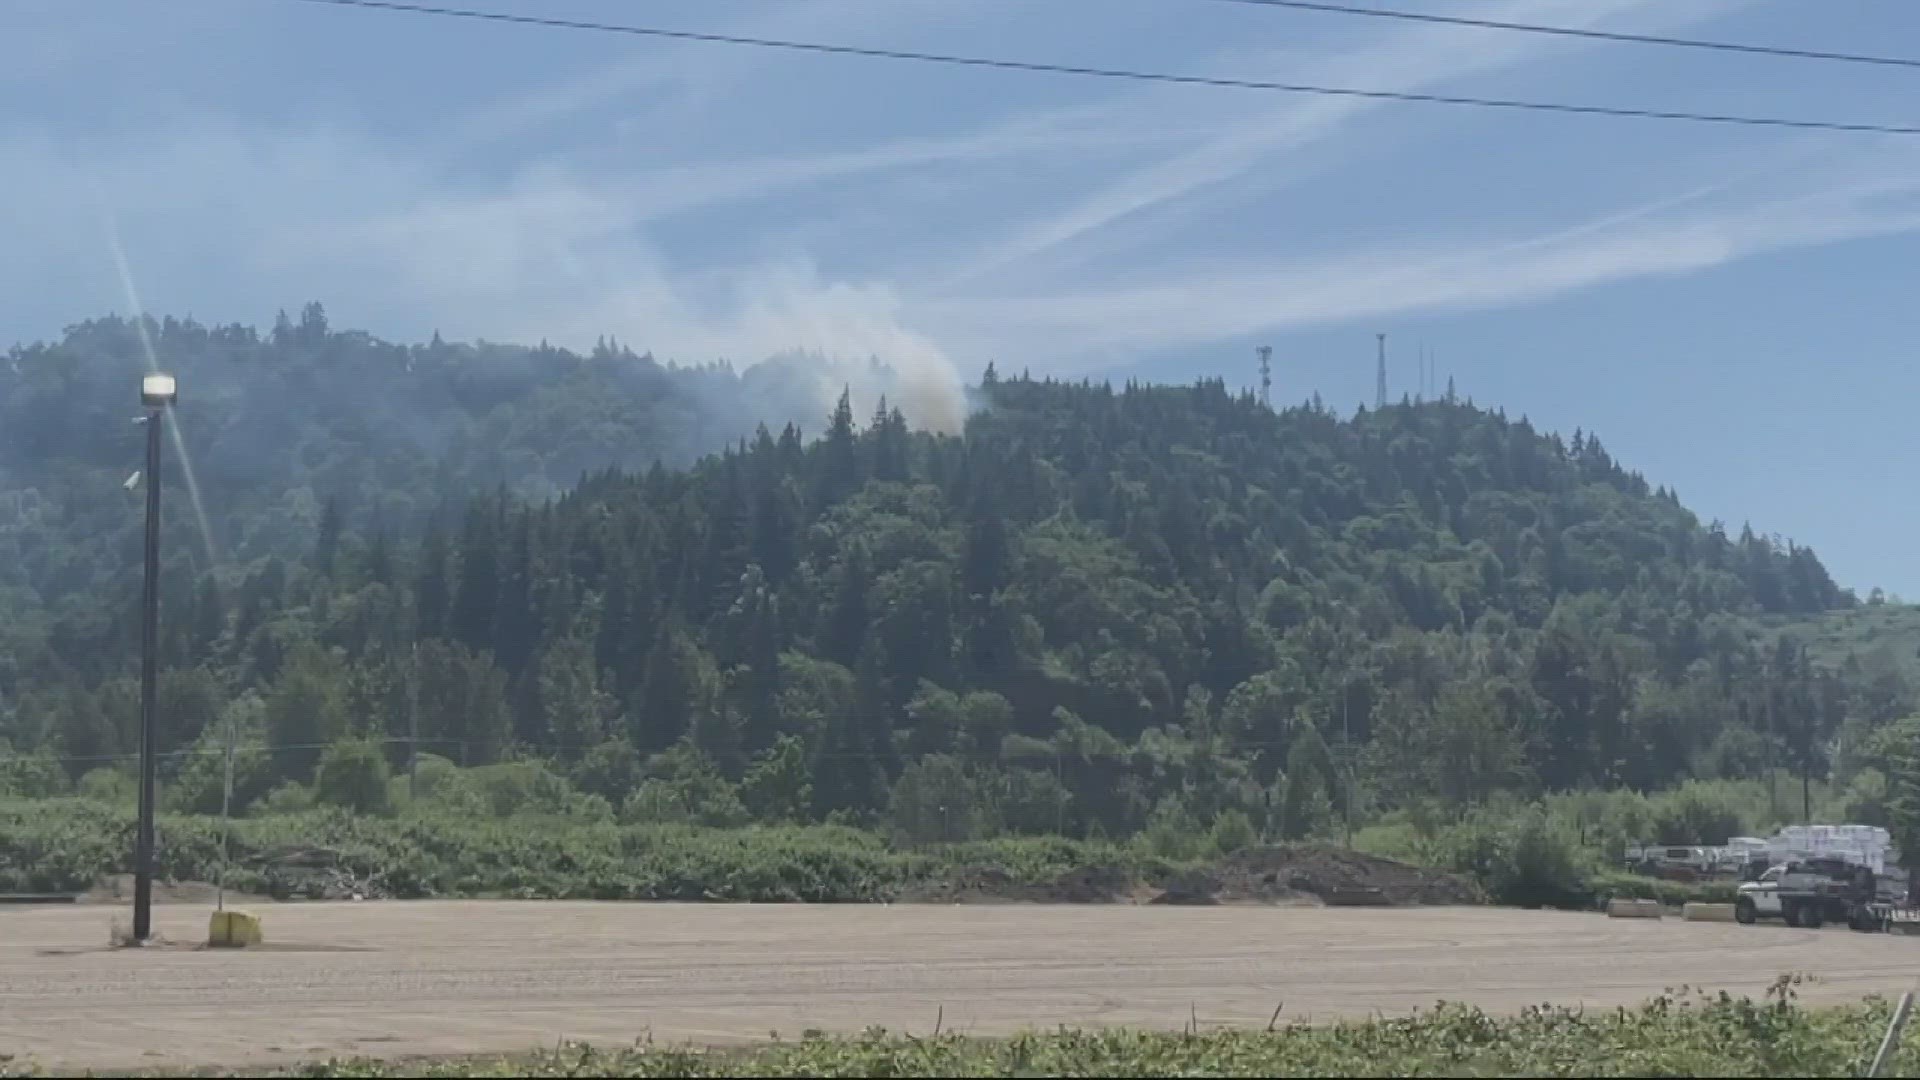 Eugene Springfield fire says the timber and brush fire started in an old quarry site south of the Swanson Lumber Mill on Sunday